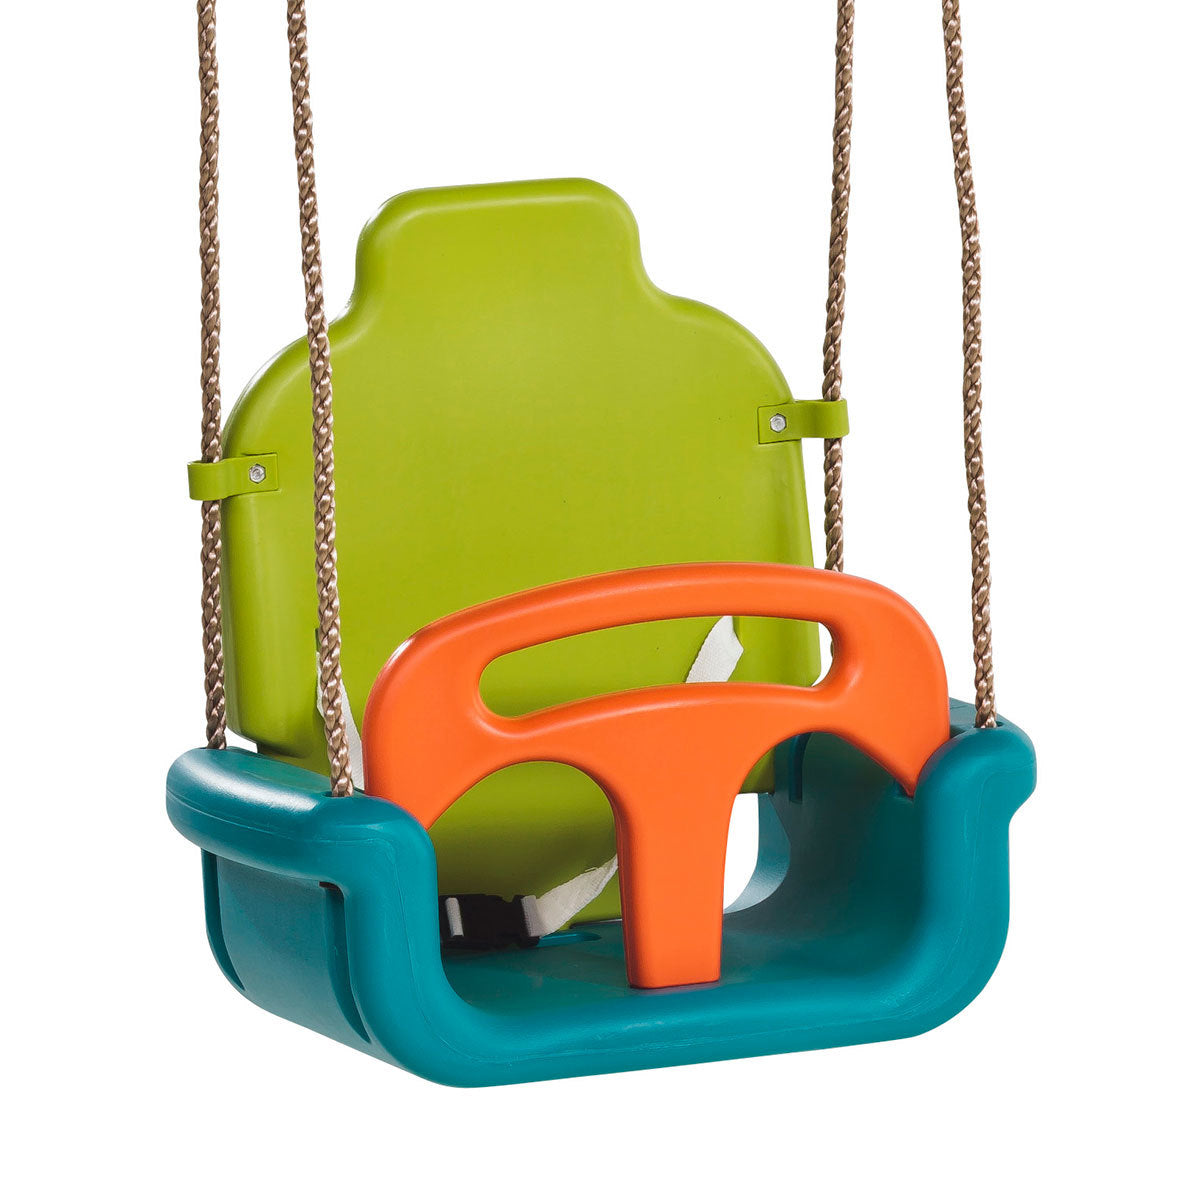 Baby Seat Growing Type Swing with Adjustable Ropes